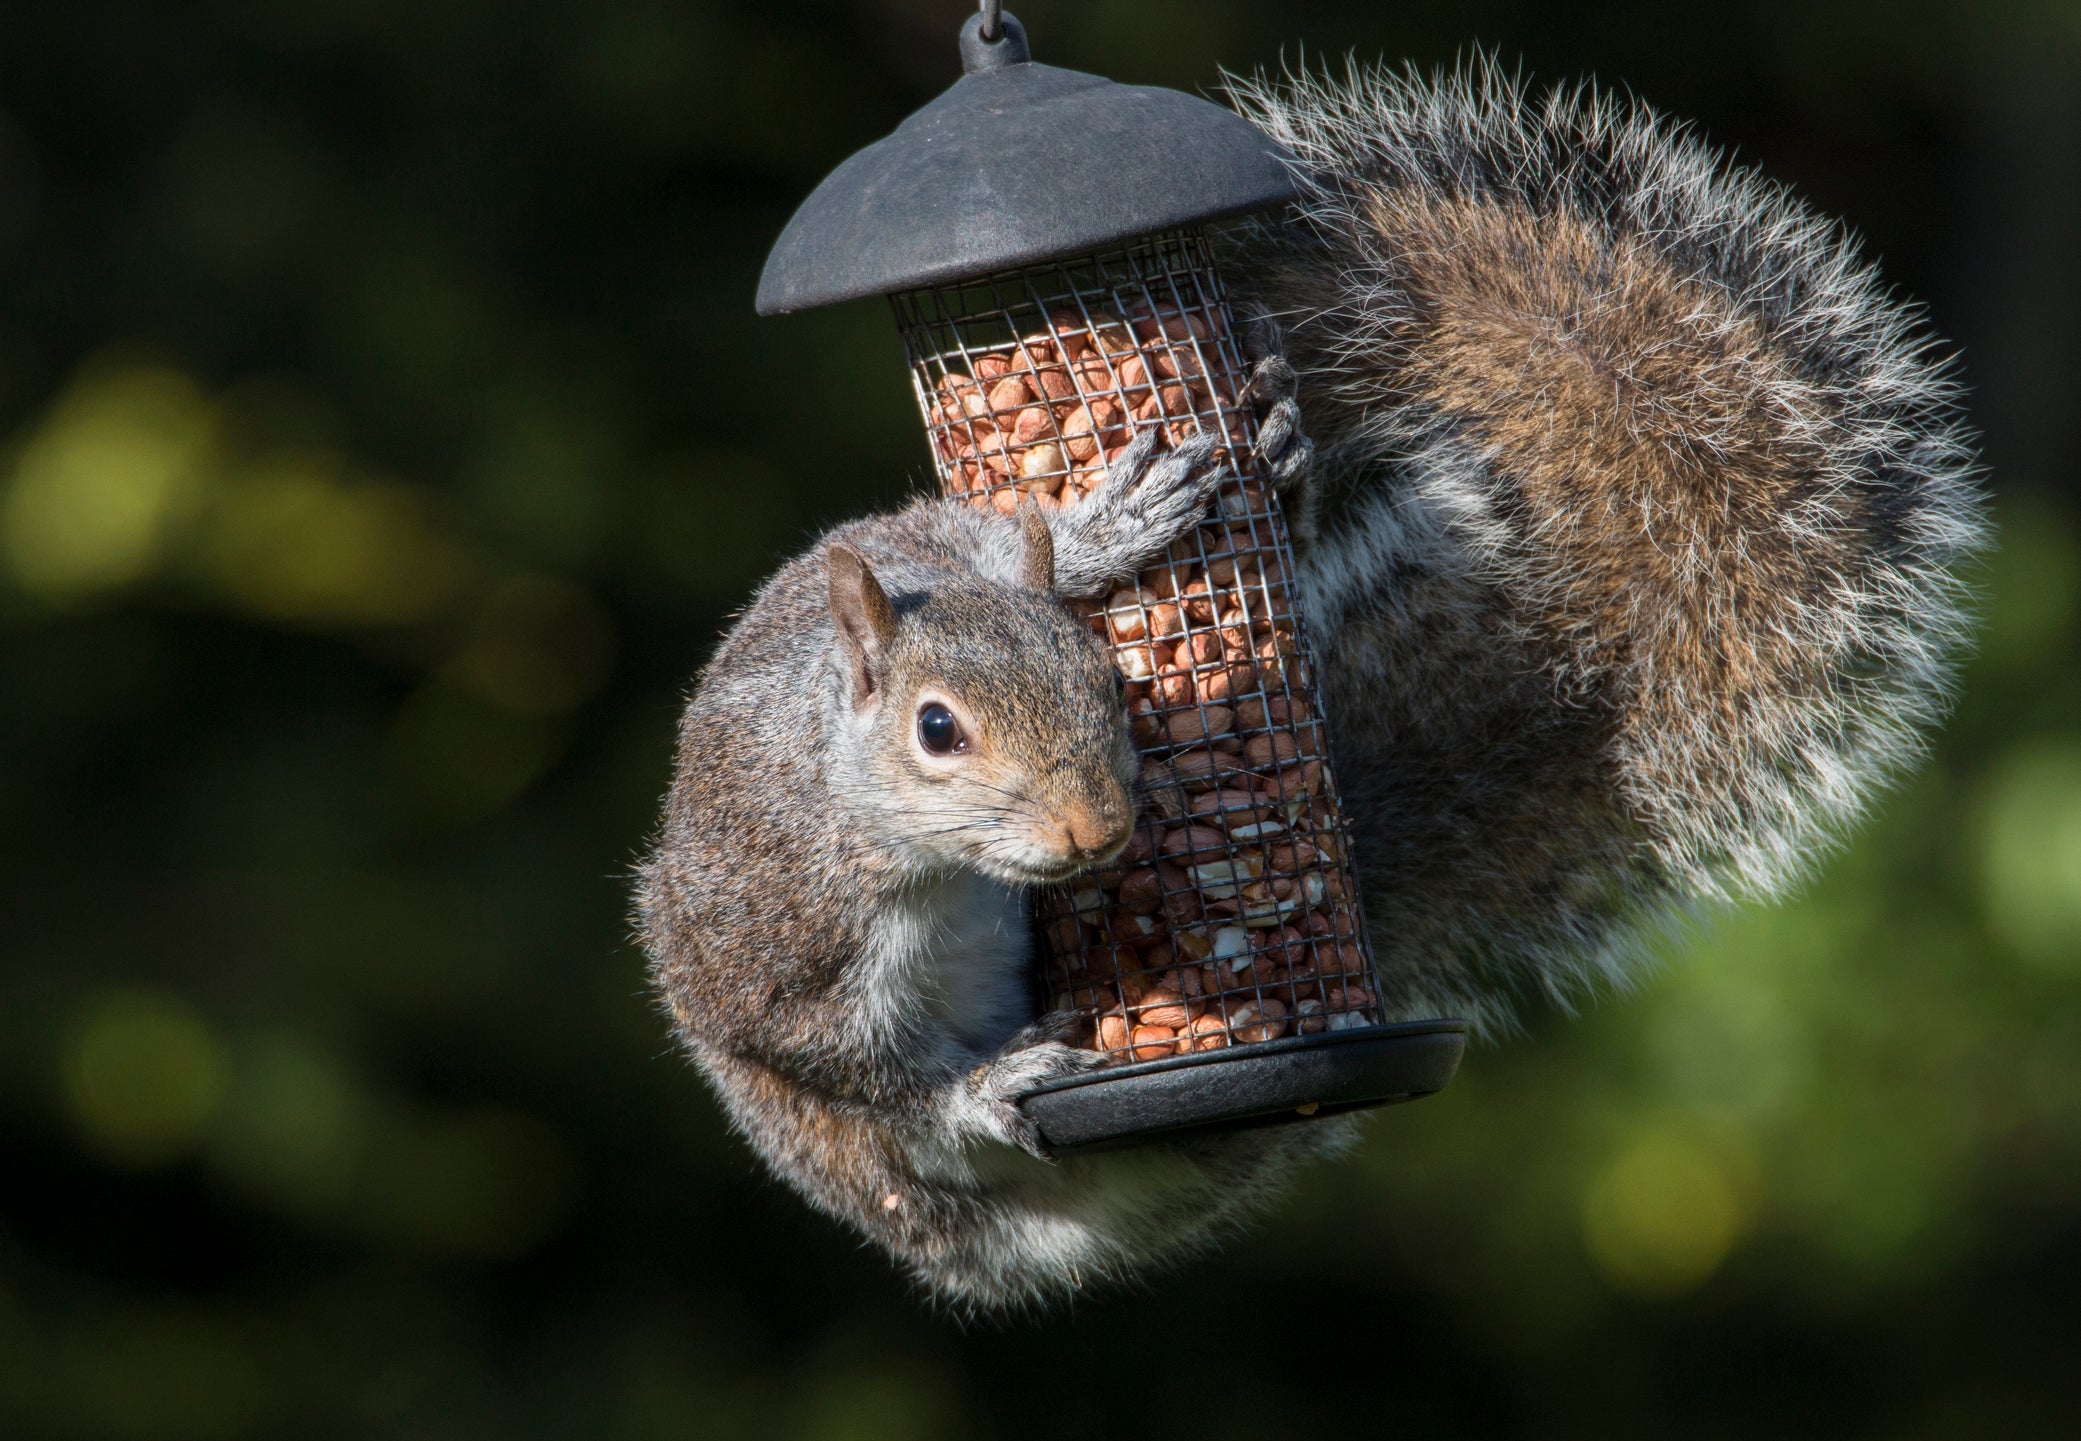 Our resident squirrel can empty the feeders in a matter of hours